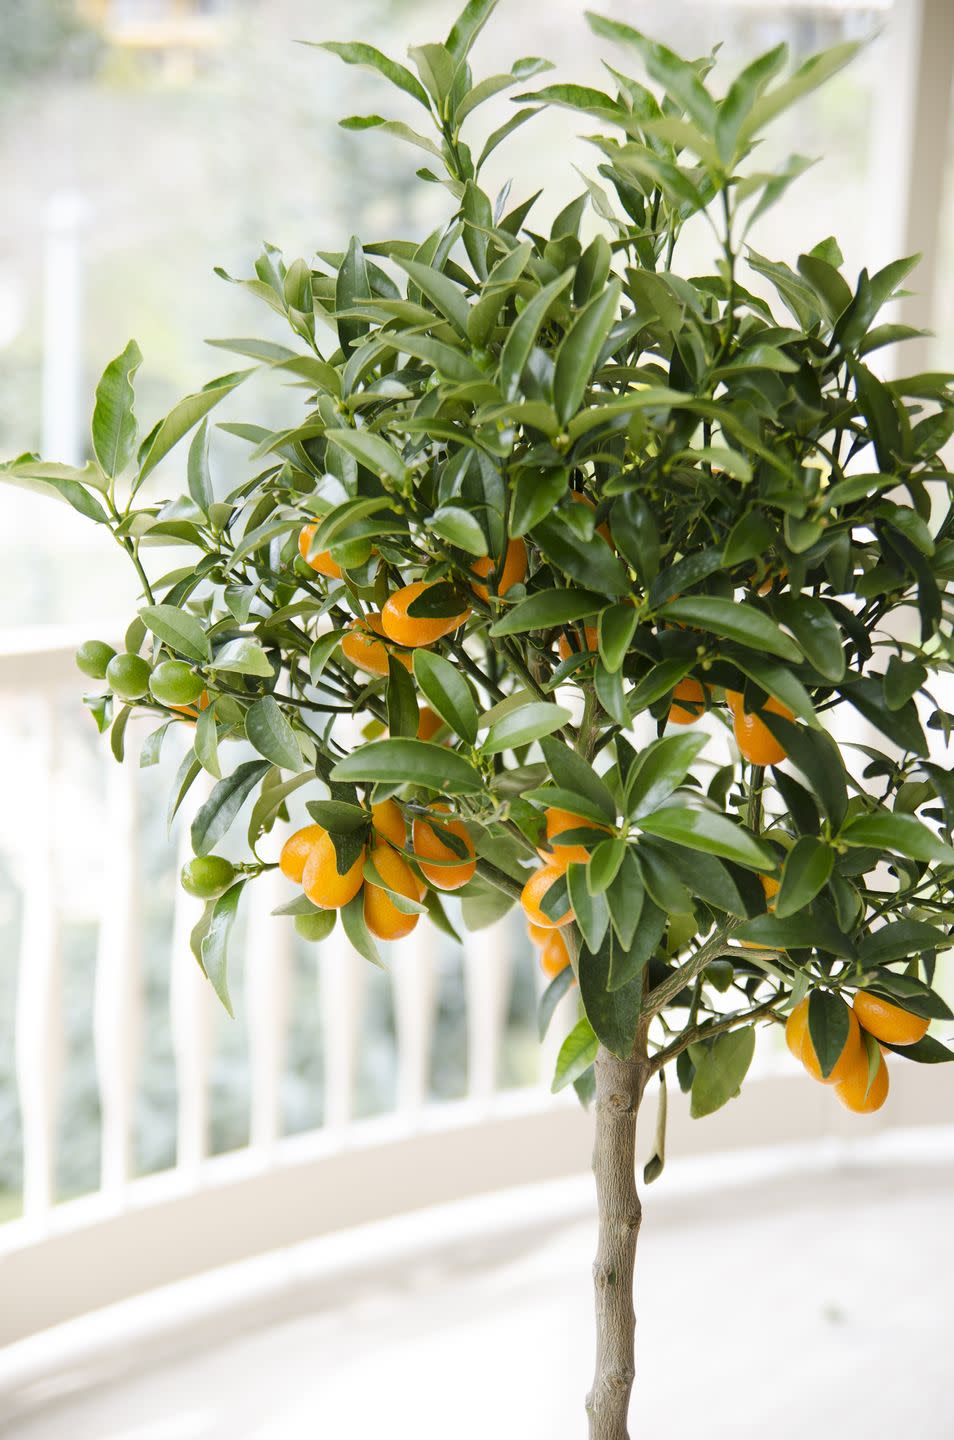 <p>You really don’t need a large garden or outdoor space to grow fruit trees. ‘Dwarf fruit trees are ideal as they never grow above 1.5 metres yet still produce a lot of fresh, flavoursome produce. Choose dwarf trees such as apricots, cherries, peaches and pears,' the experts recommend. </p><p>‘Varieties of columnar trees are also perfect for balconies as they grow in a narrow shape.’</p>